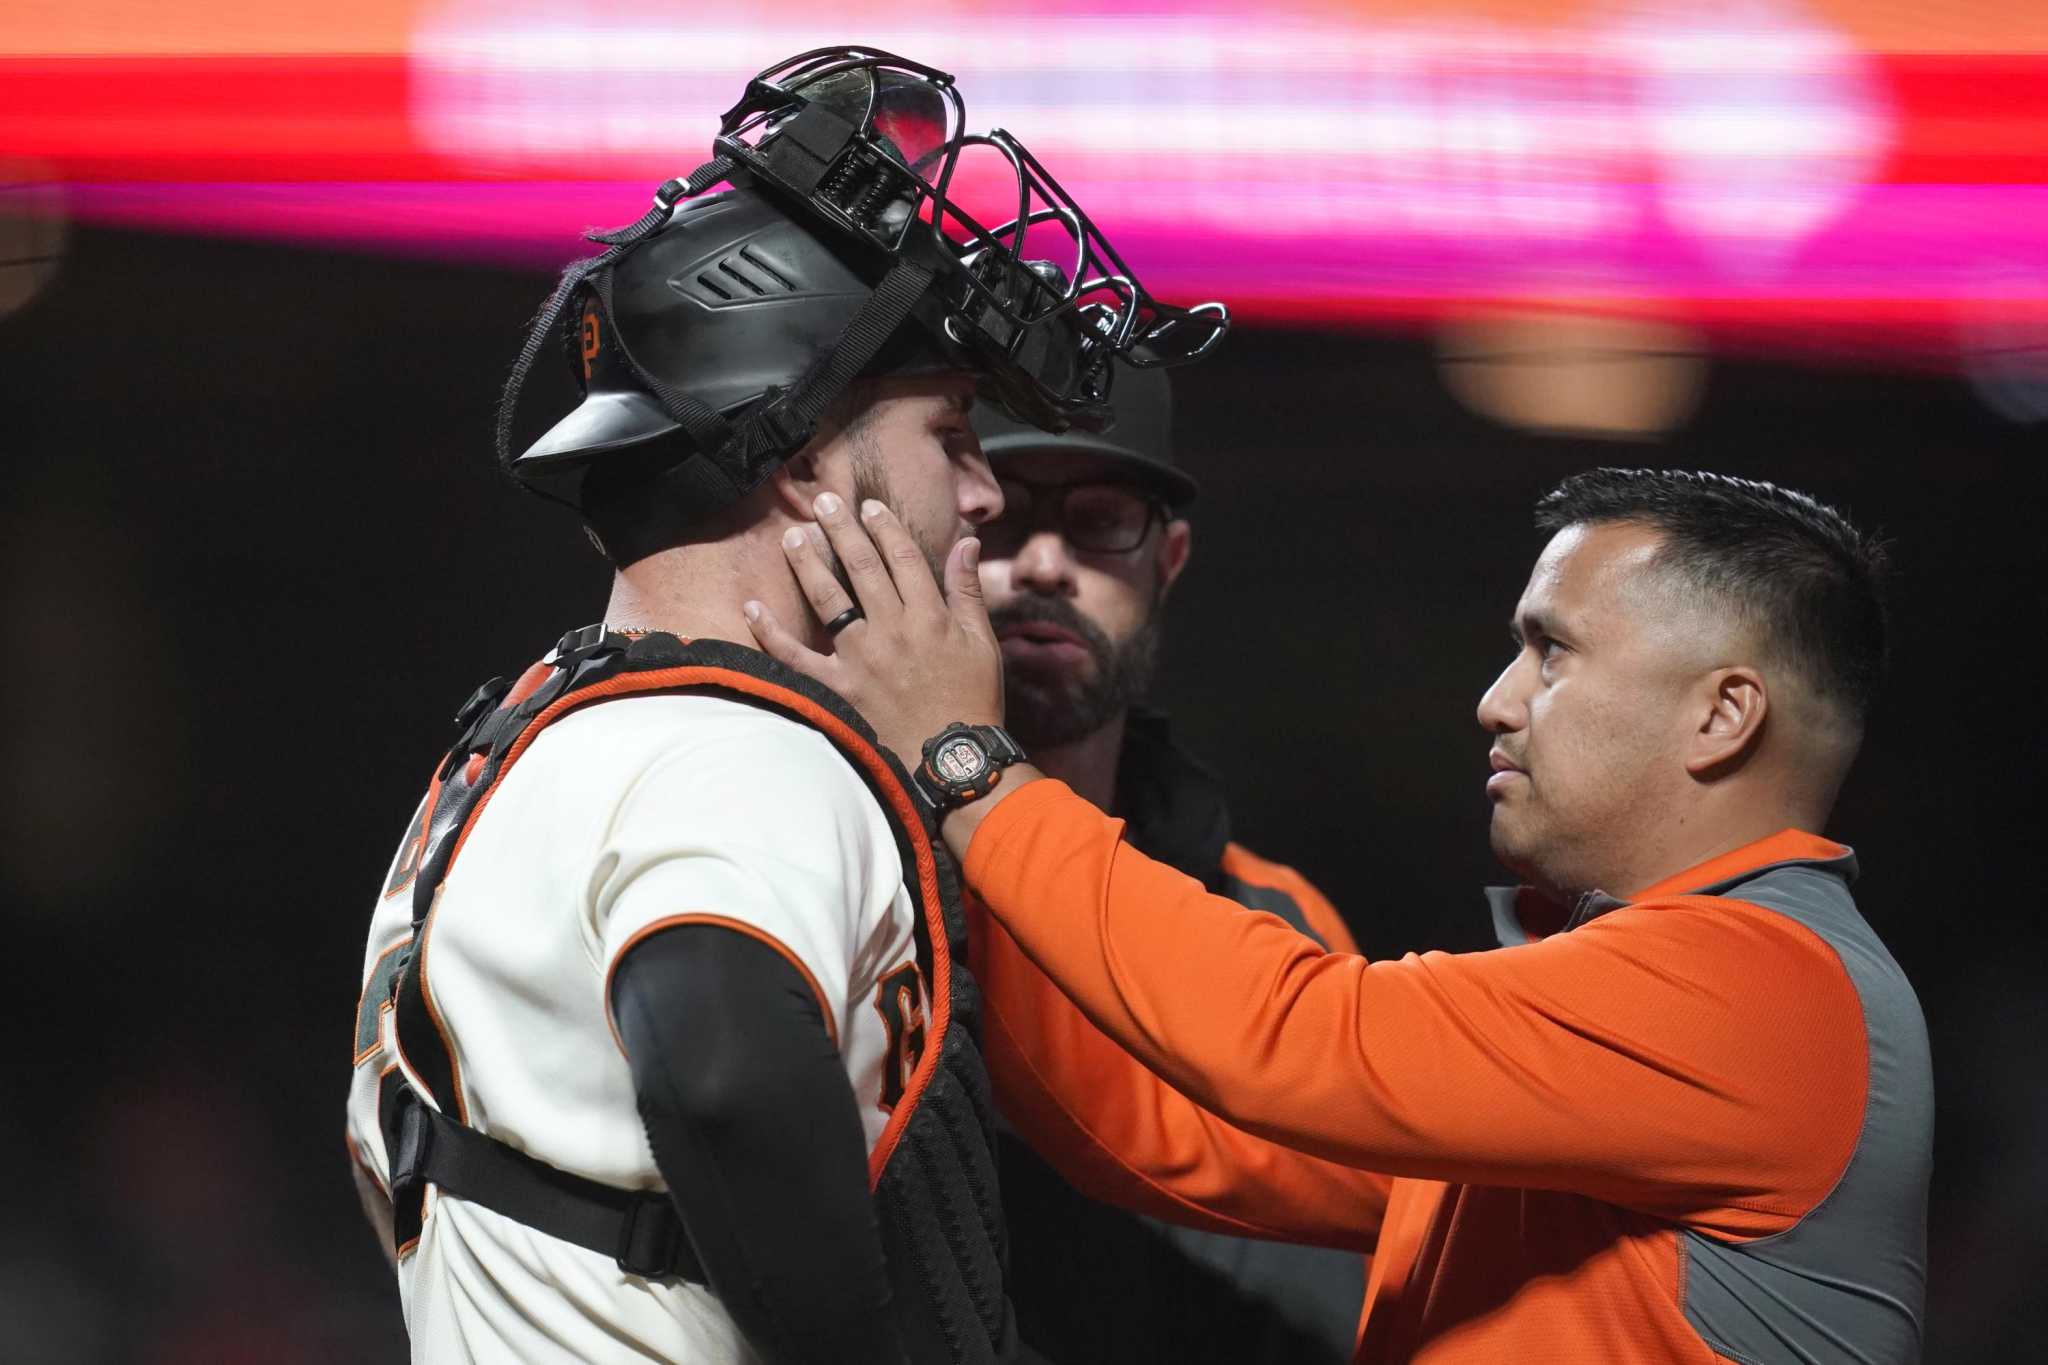 Giants catcher Joey Bart on concussion list after taking foul ball